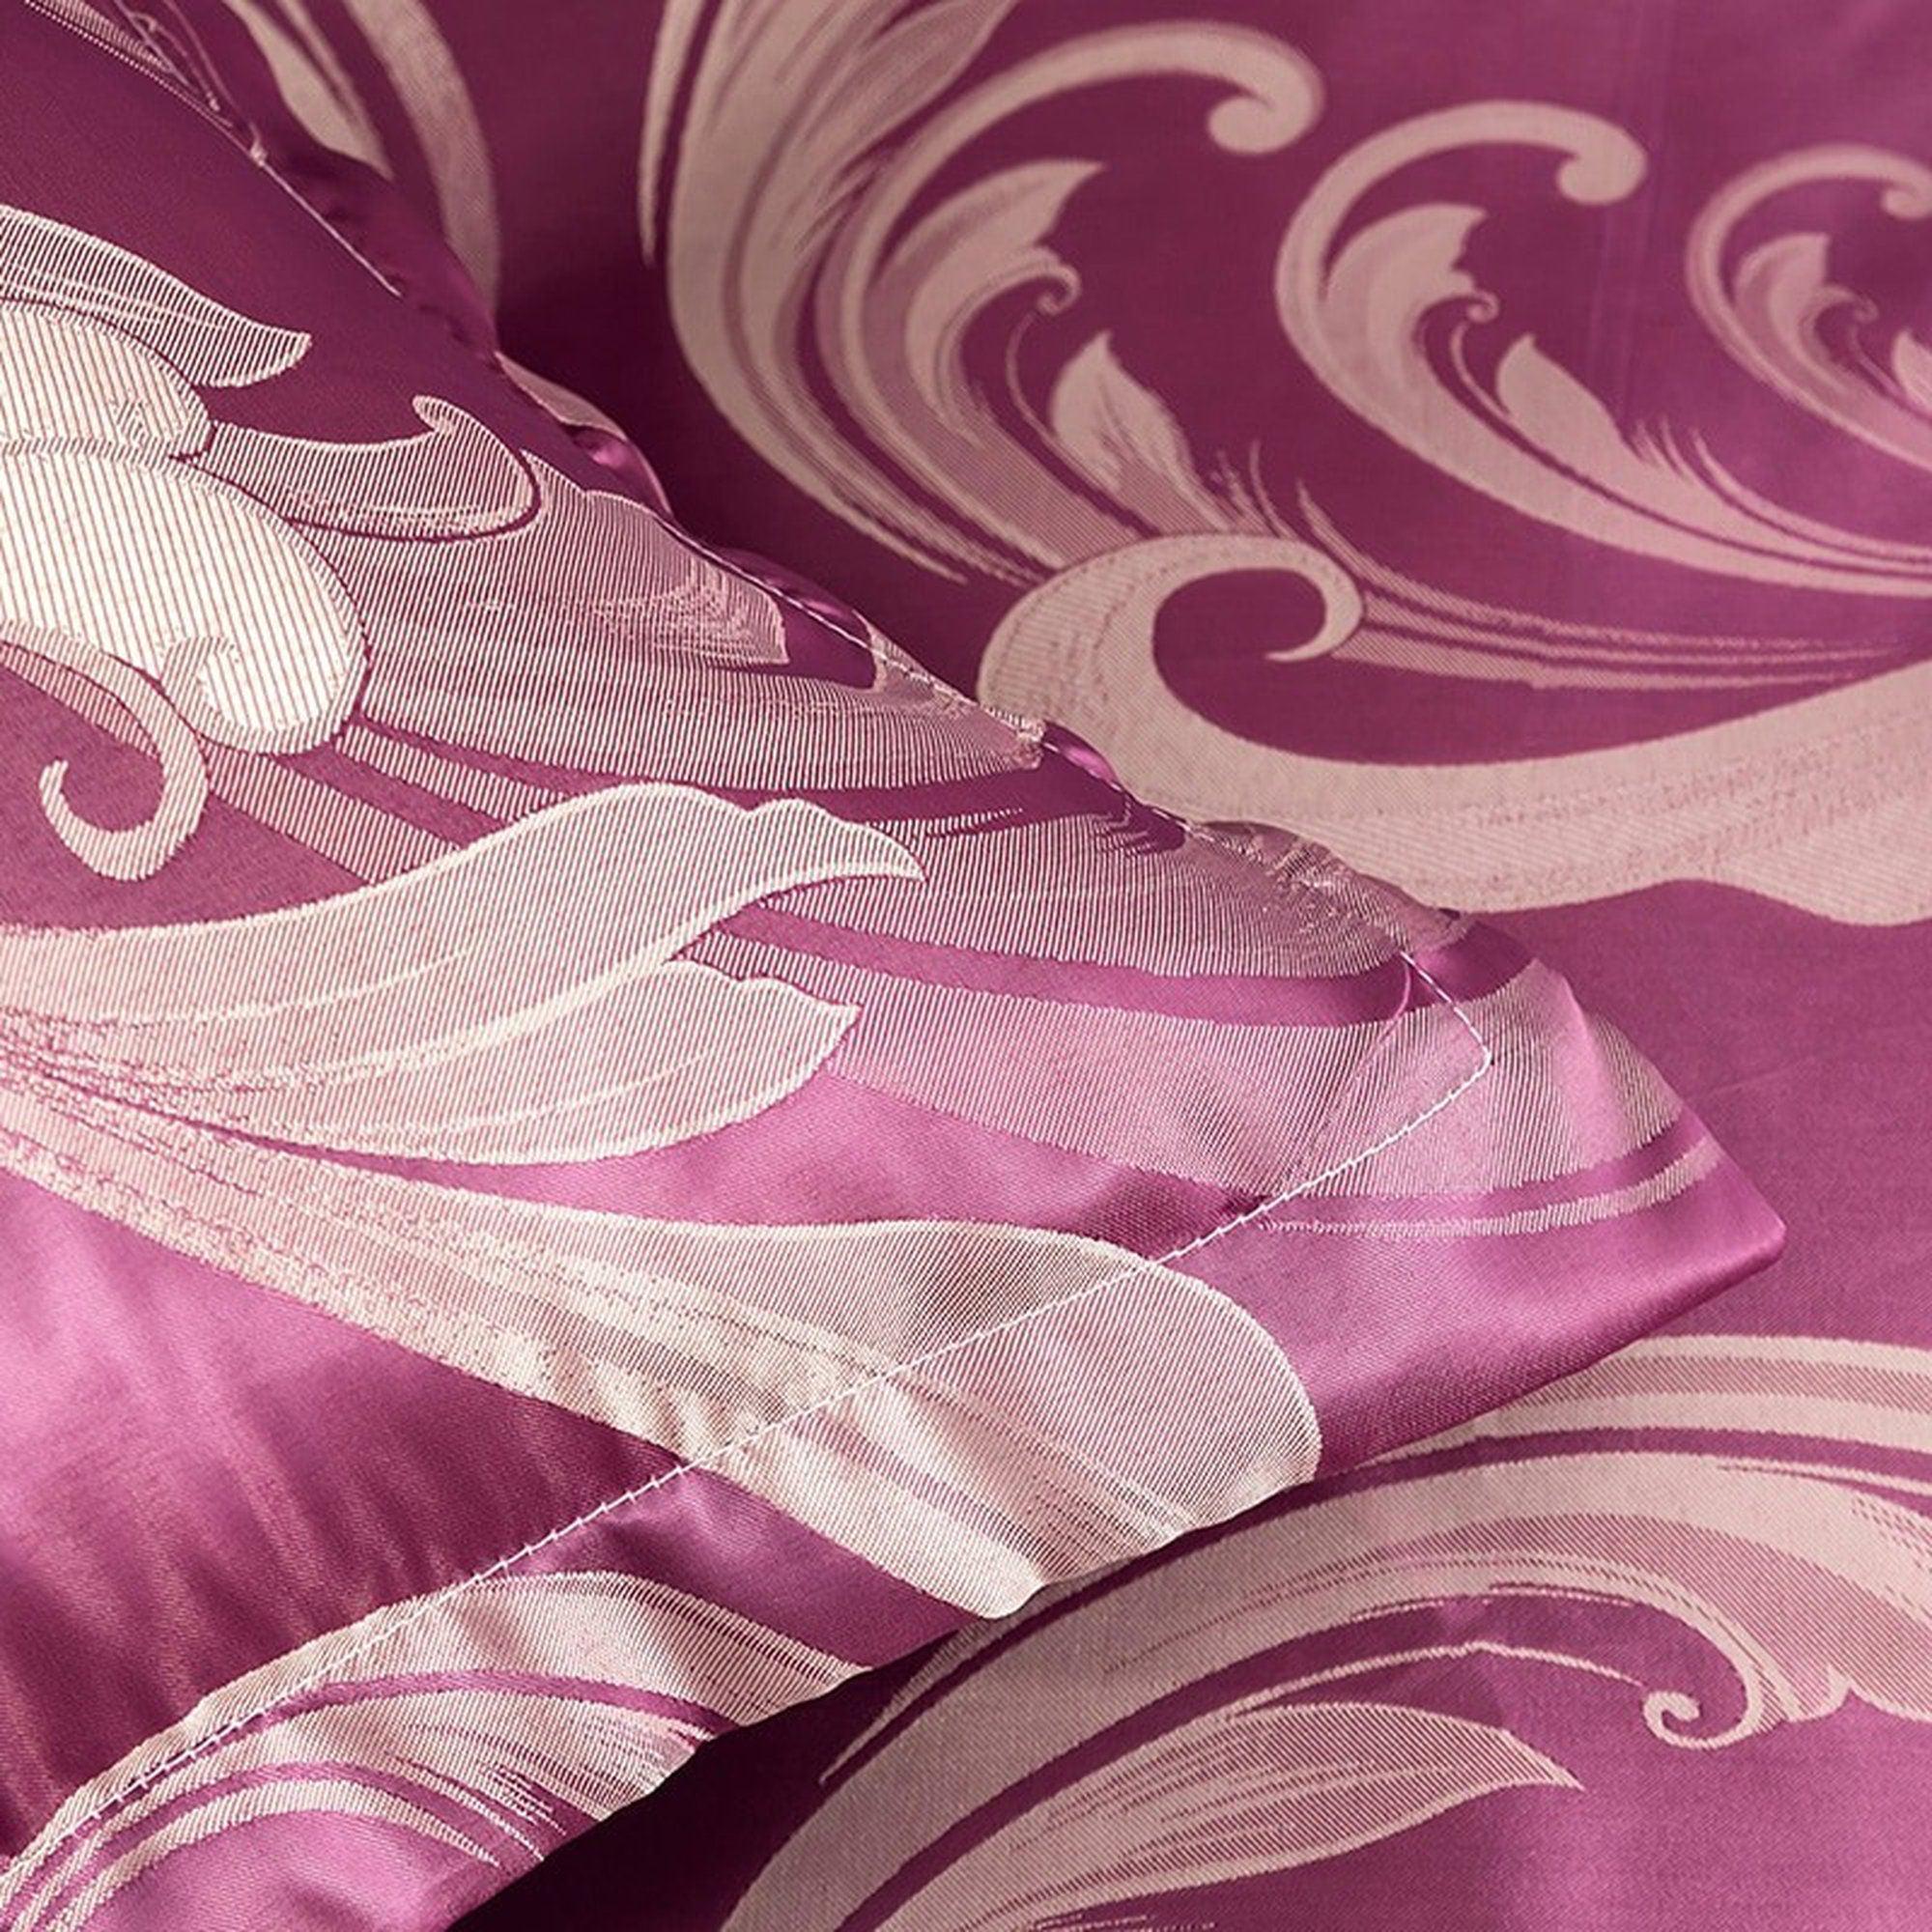 daintyduvet Rouge Pink Luxury Bedding made with Silky Jacquard Fabric, Damask Duvet Cover Set, Designer Bedding, Aesthetic Duvet King Queen Full Twin